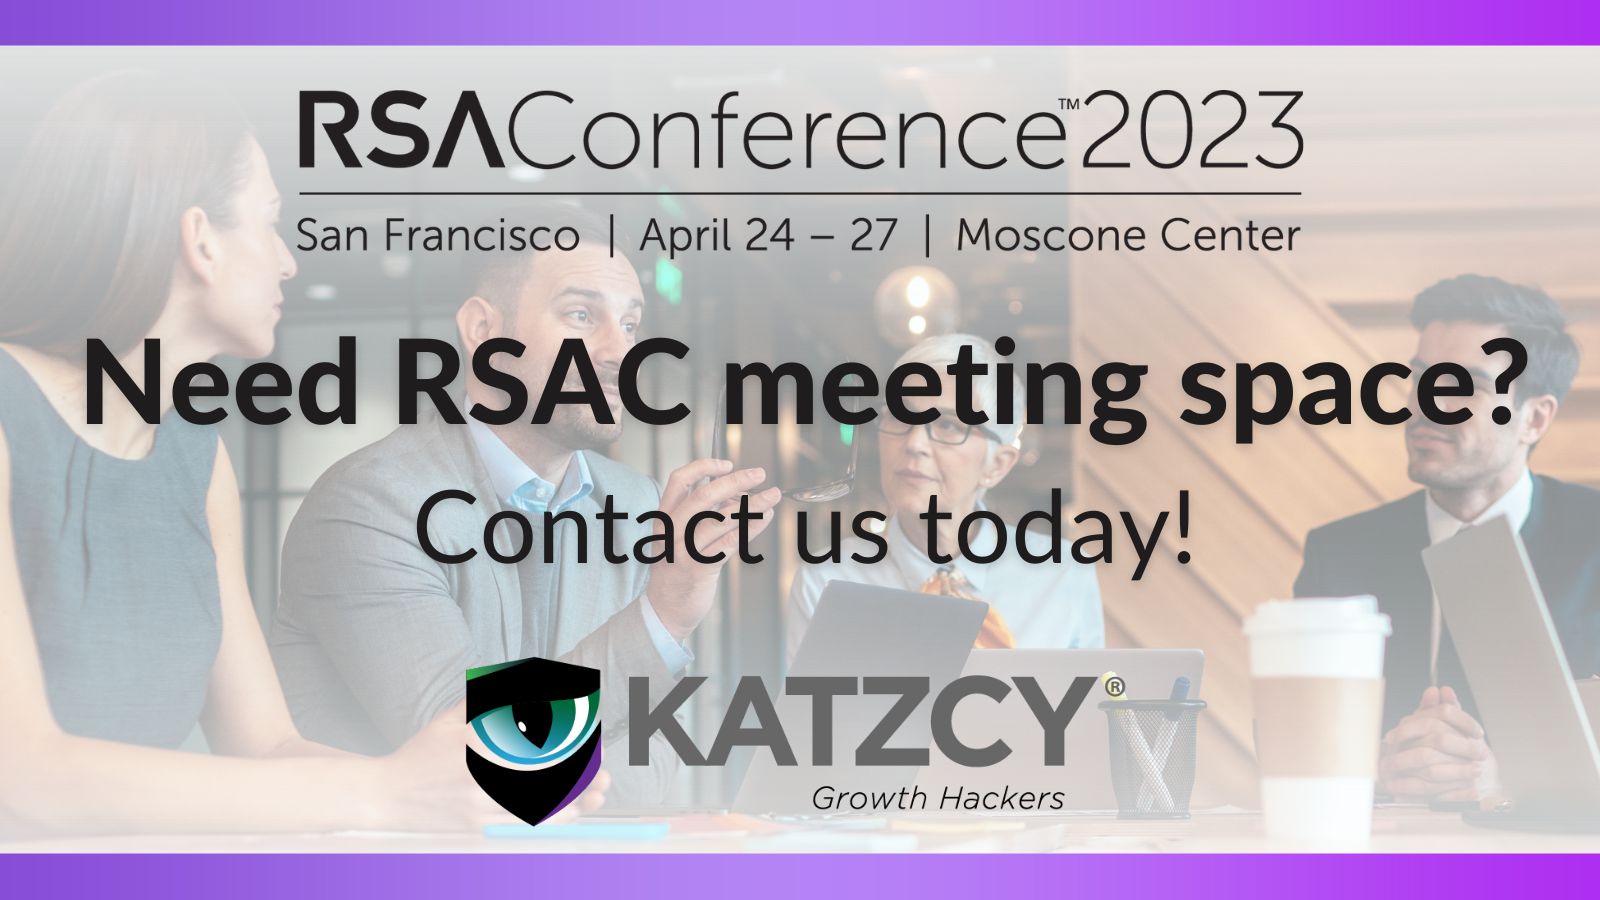 Need RSAC meeting space? Contact Katzcy today! (Background image of team meeting at a table)